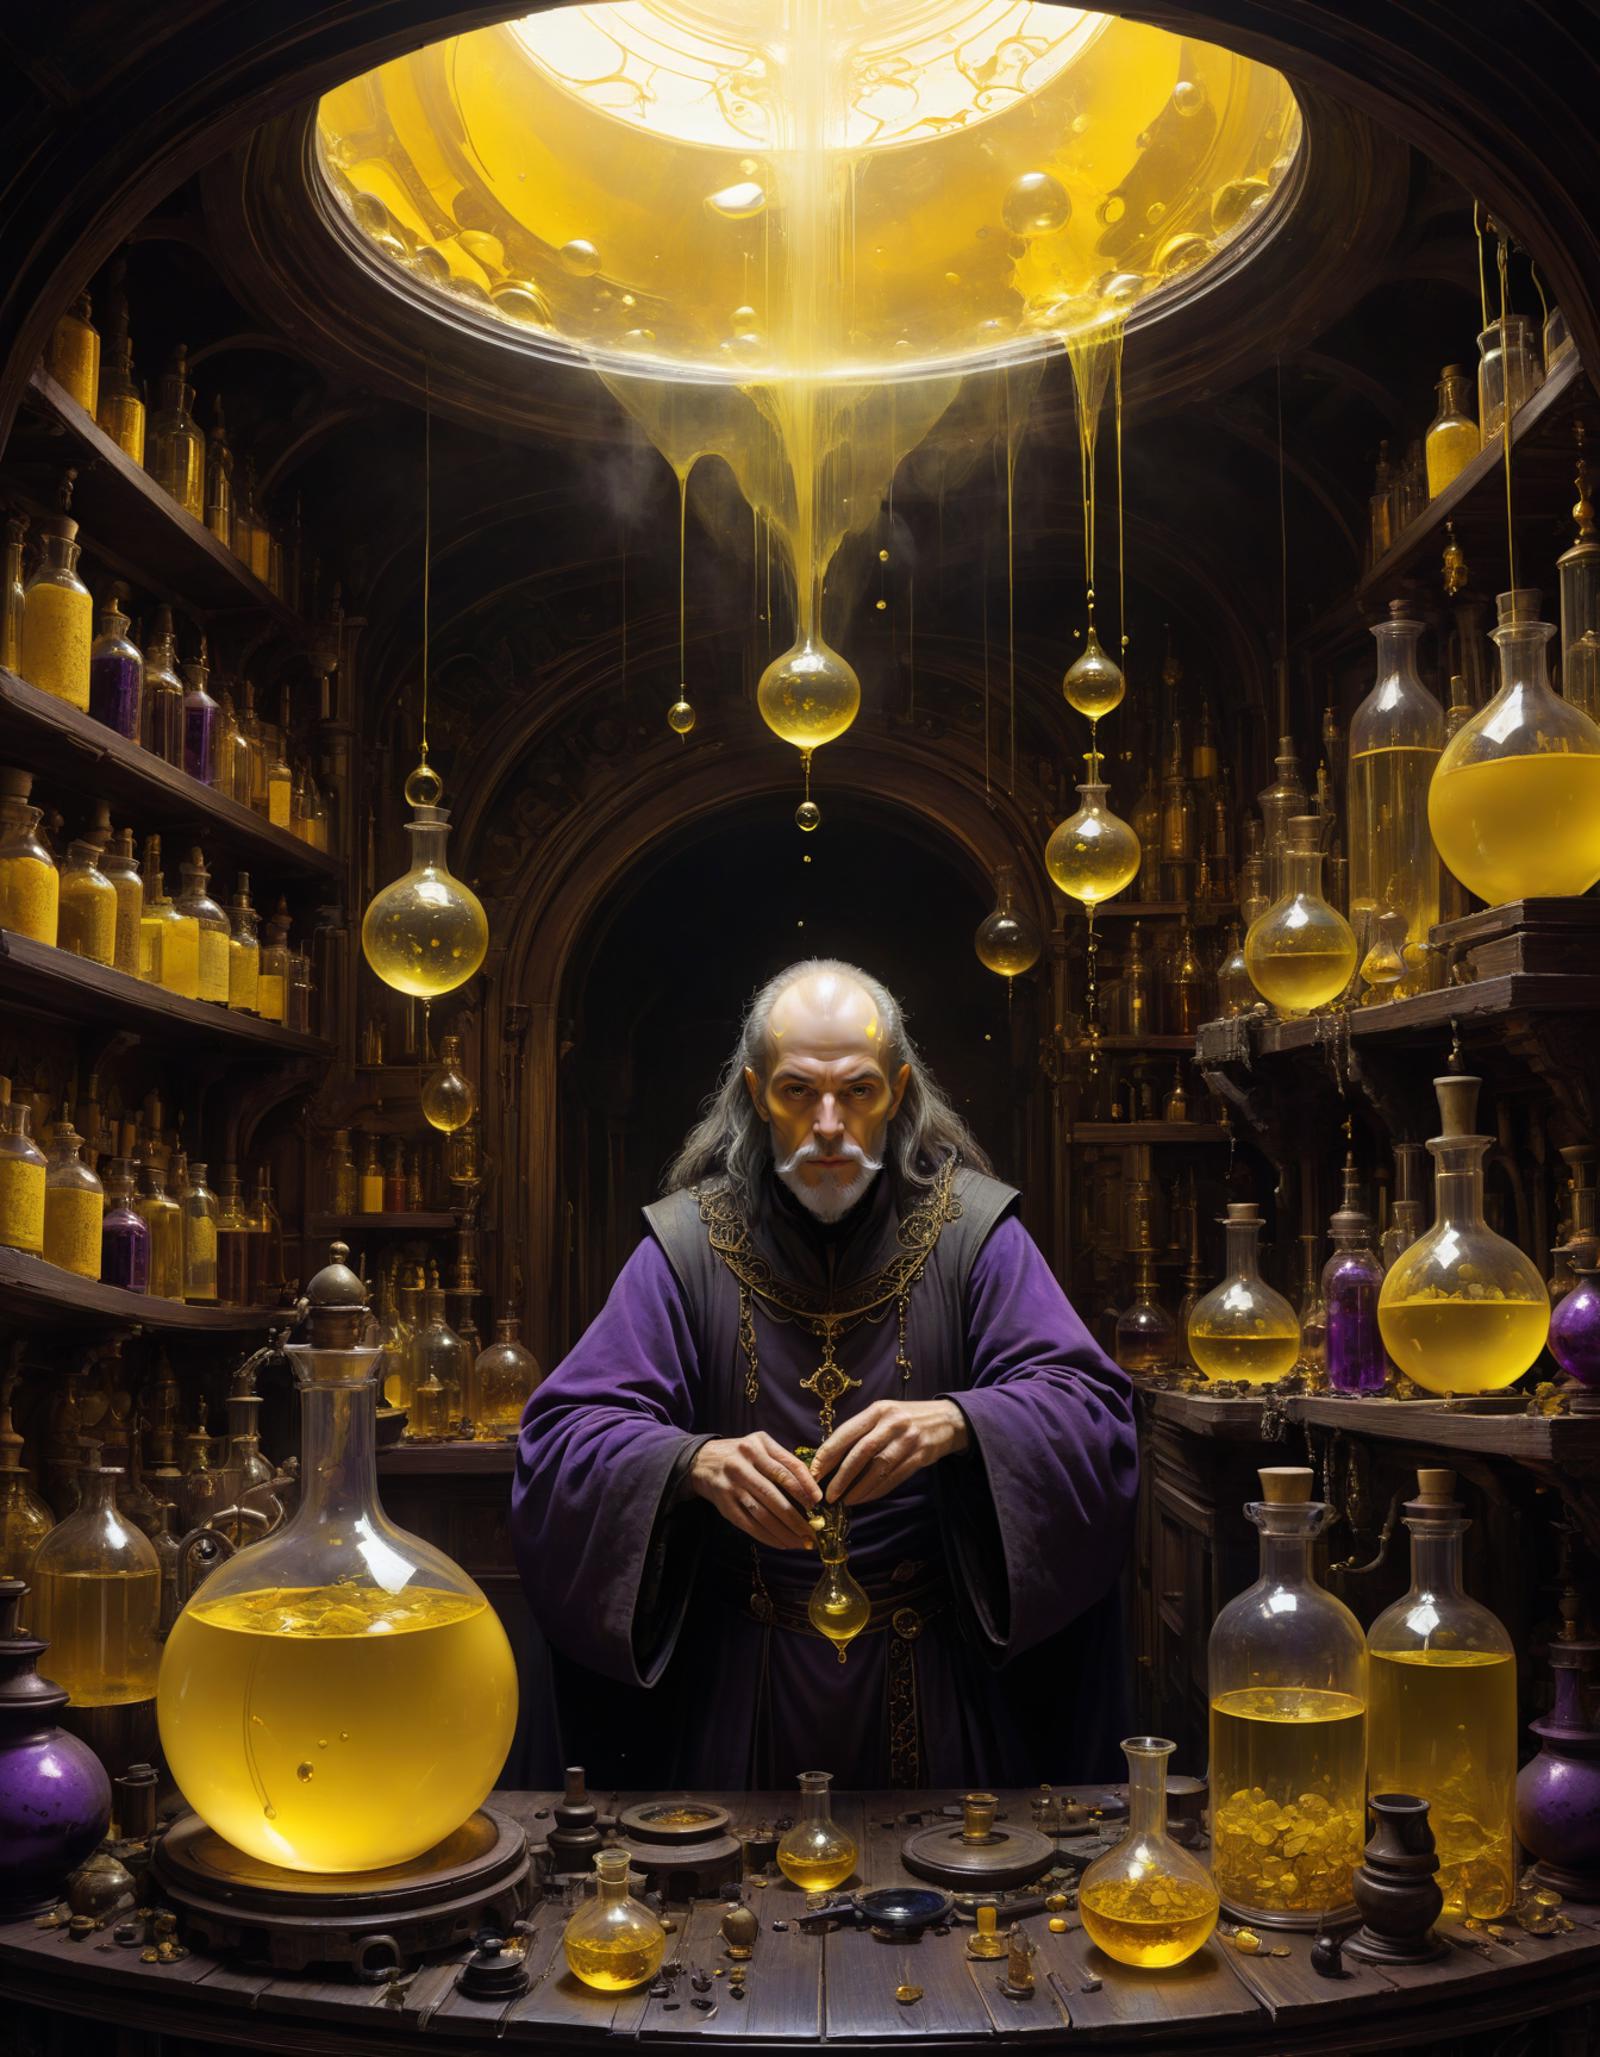 Purple-robed man in a laboratory surrounded by glass bottles and vials.